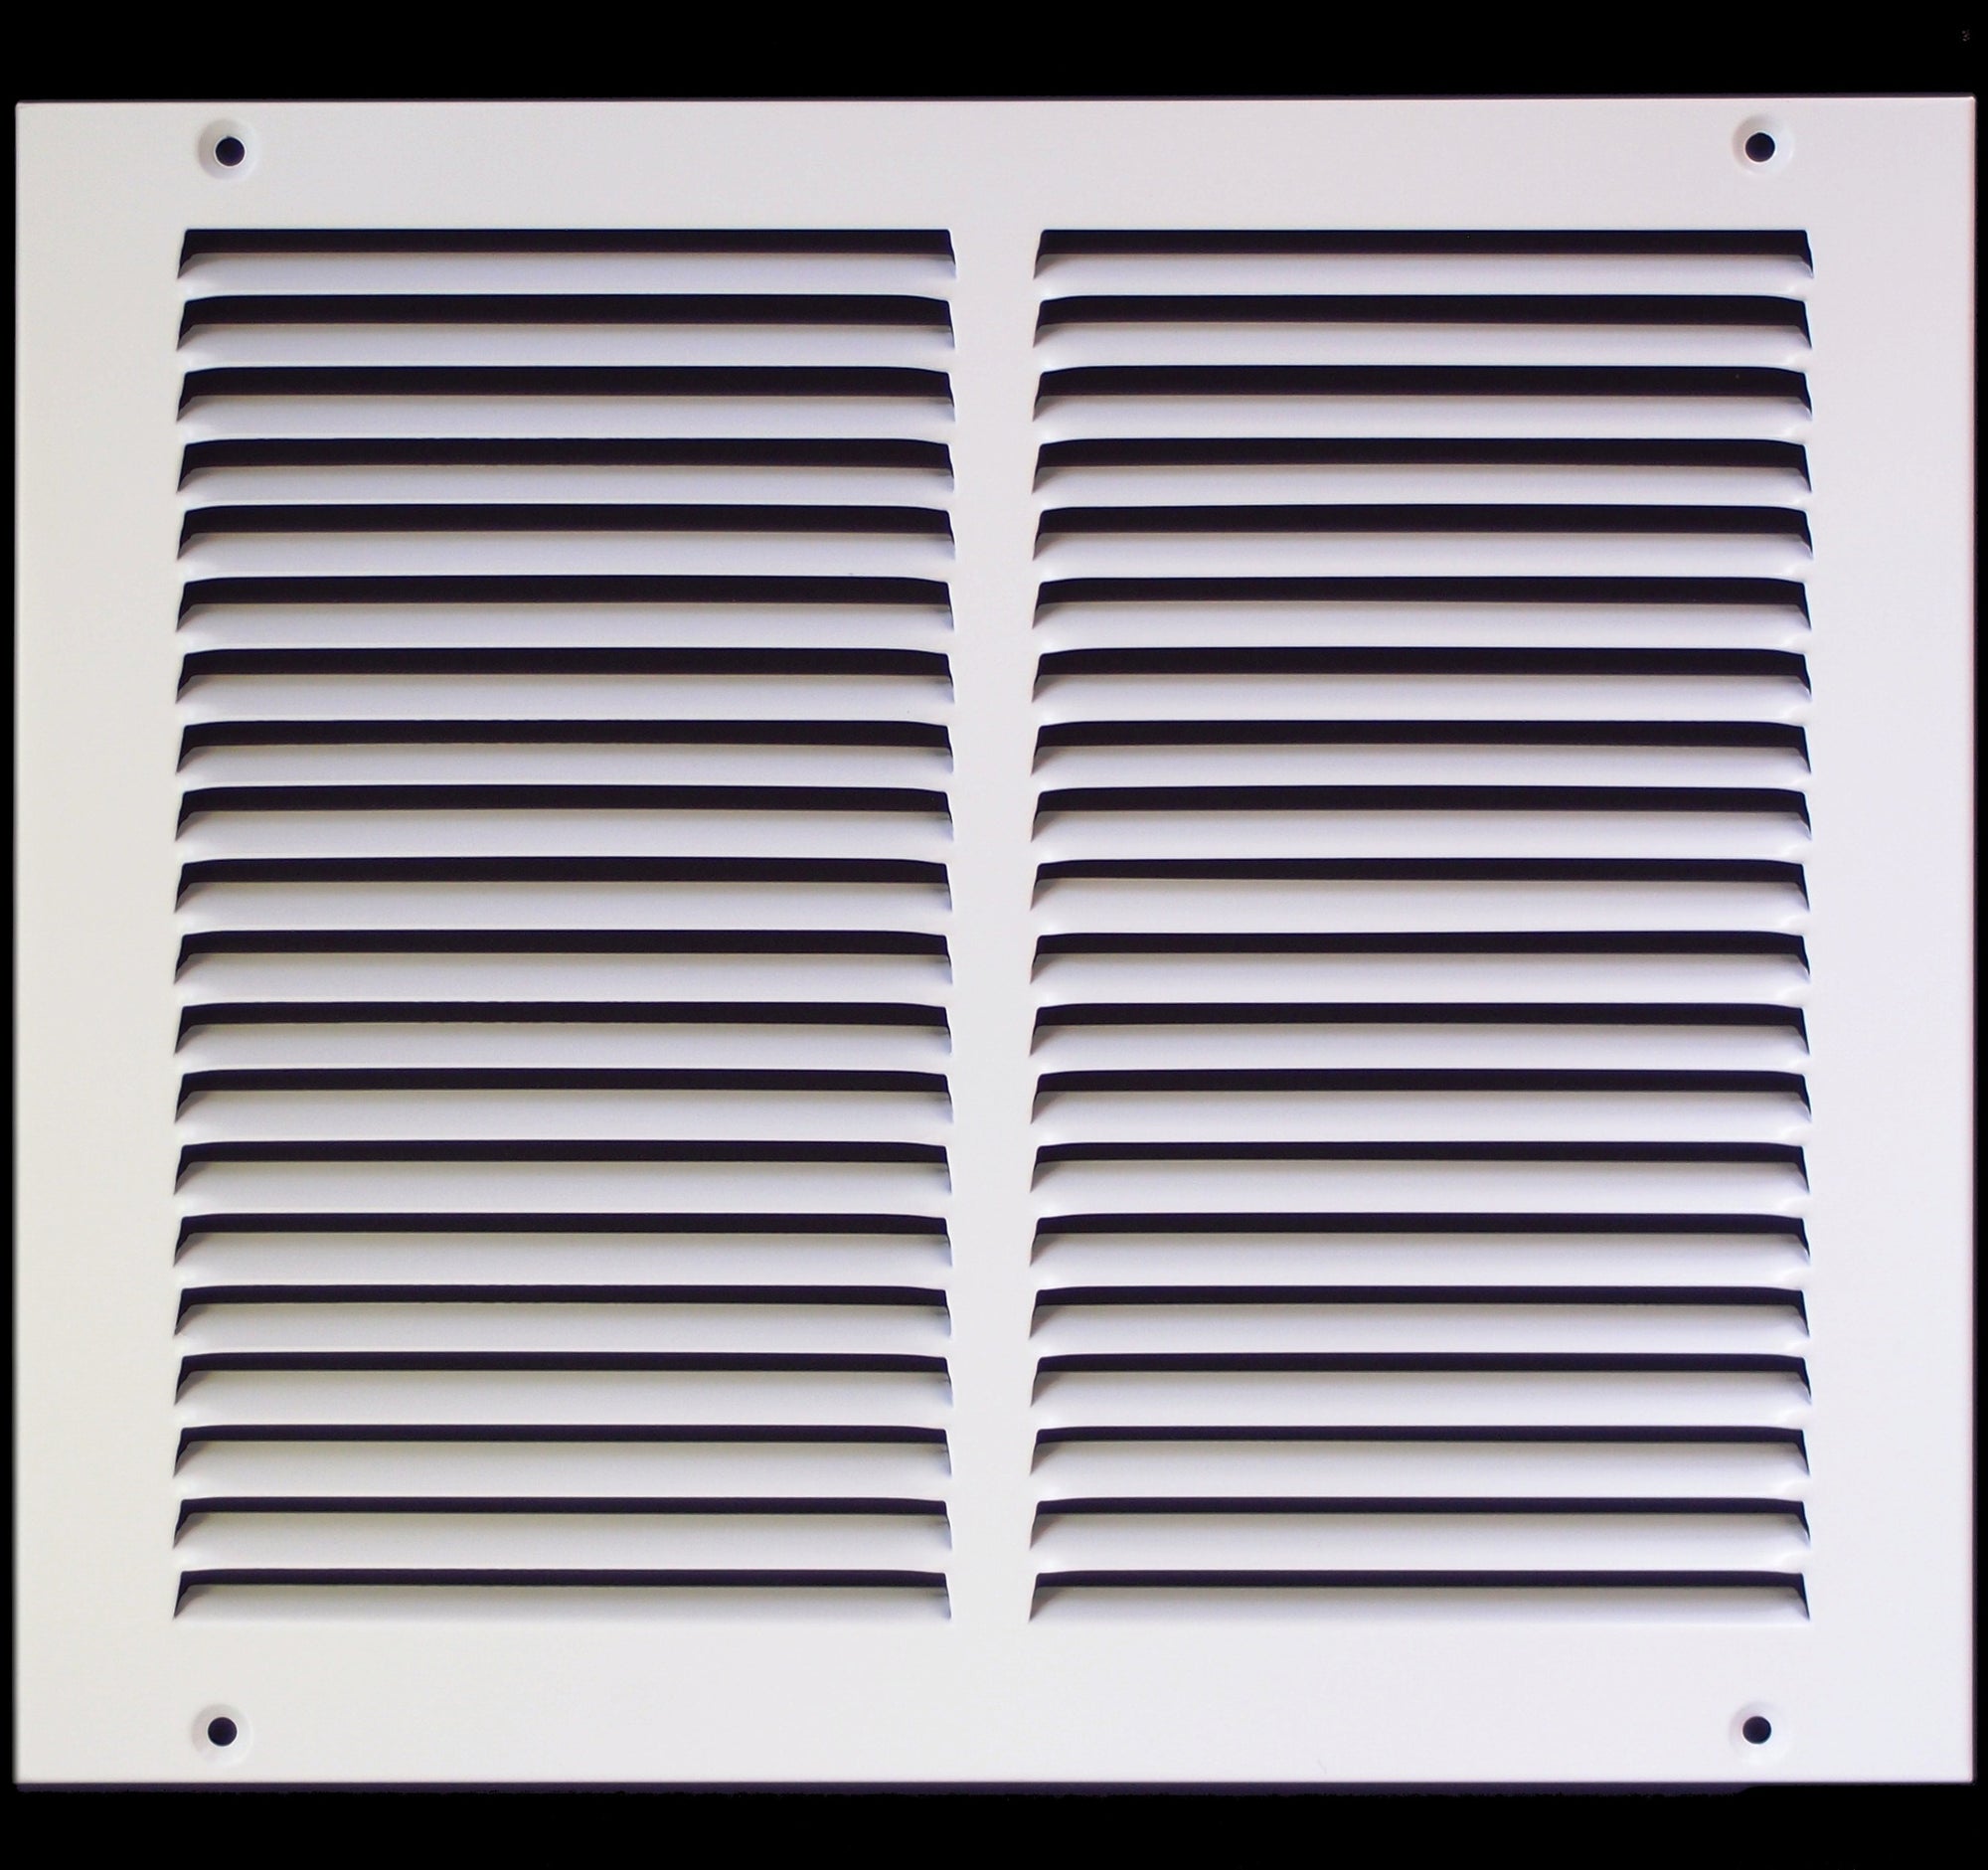 12" X 10" Air Vent Return Grilles - Sidewall and Ceiling - Steel